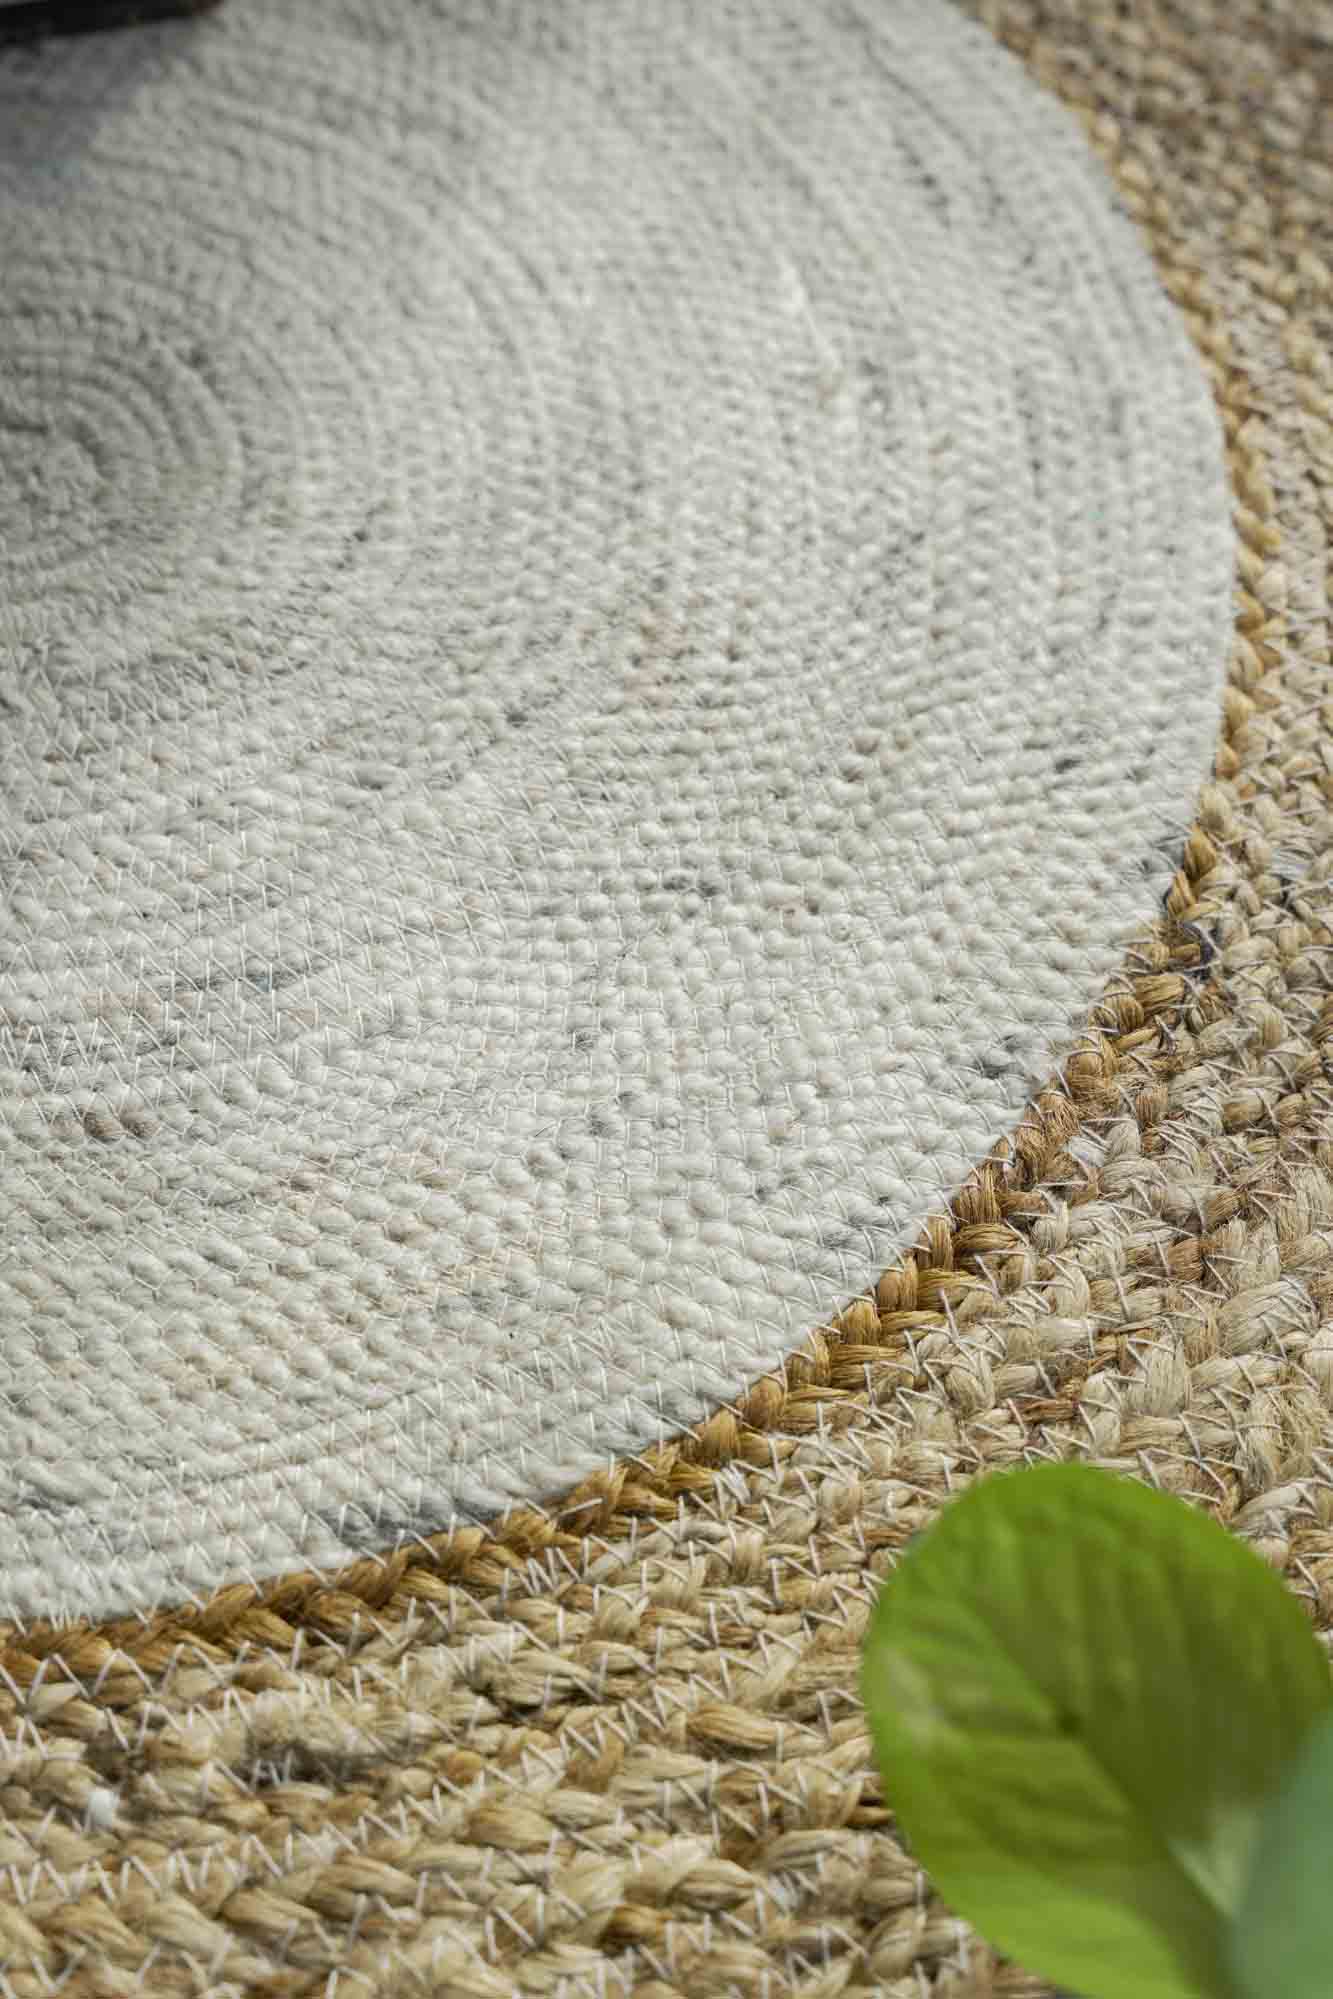 Cozy Chic: Warmth and Style with Jute Rug Delights